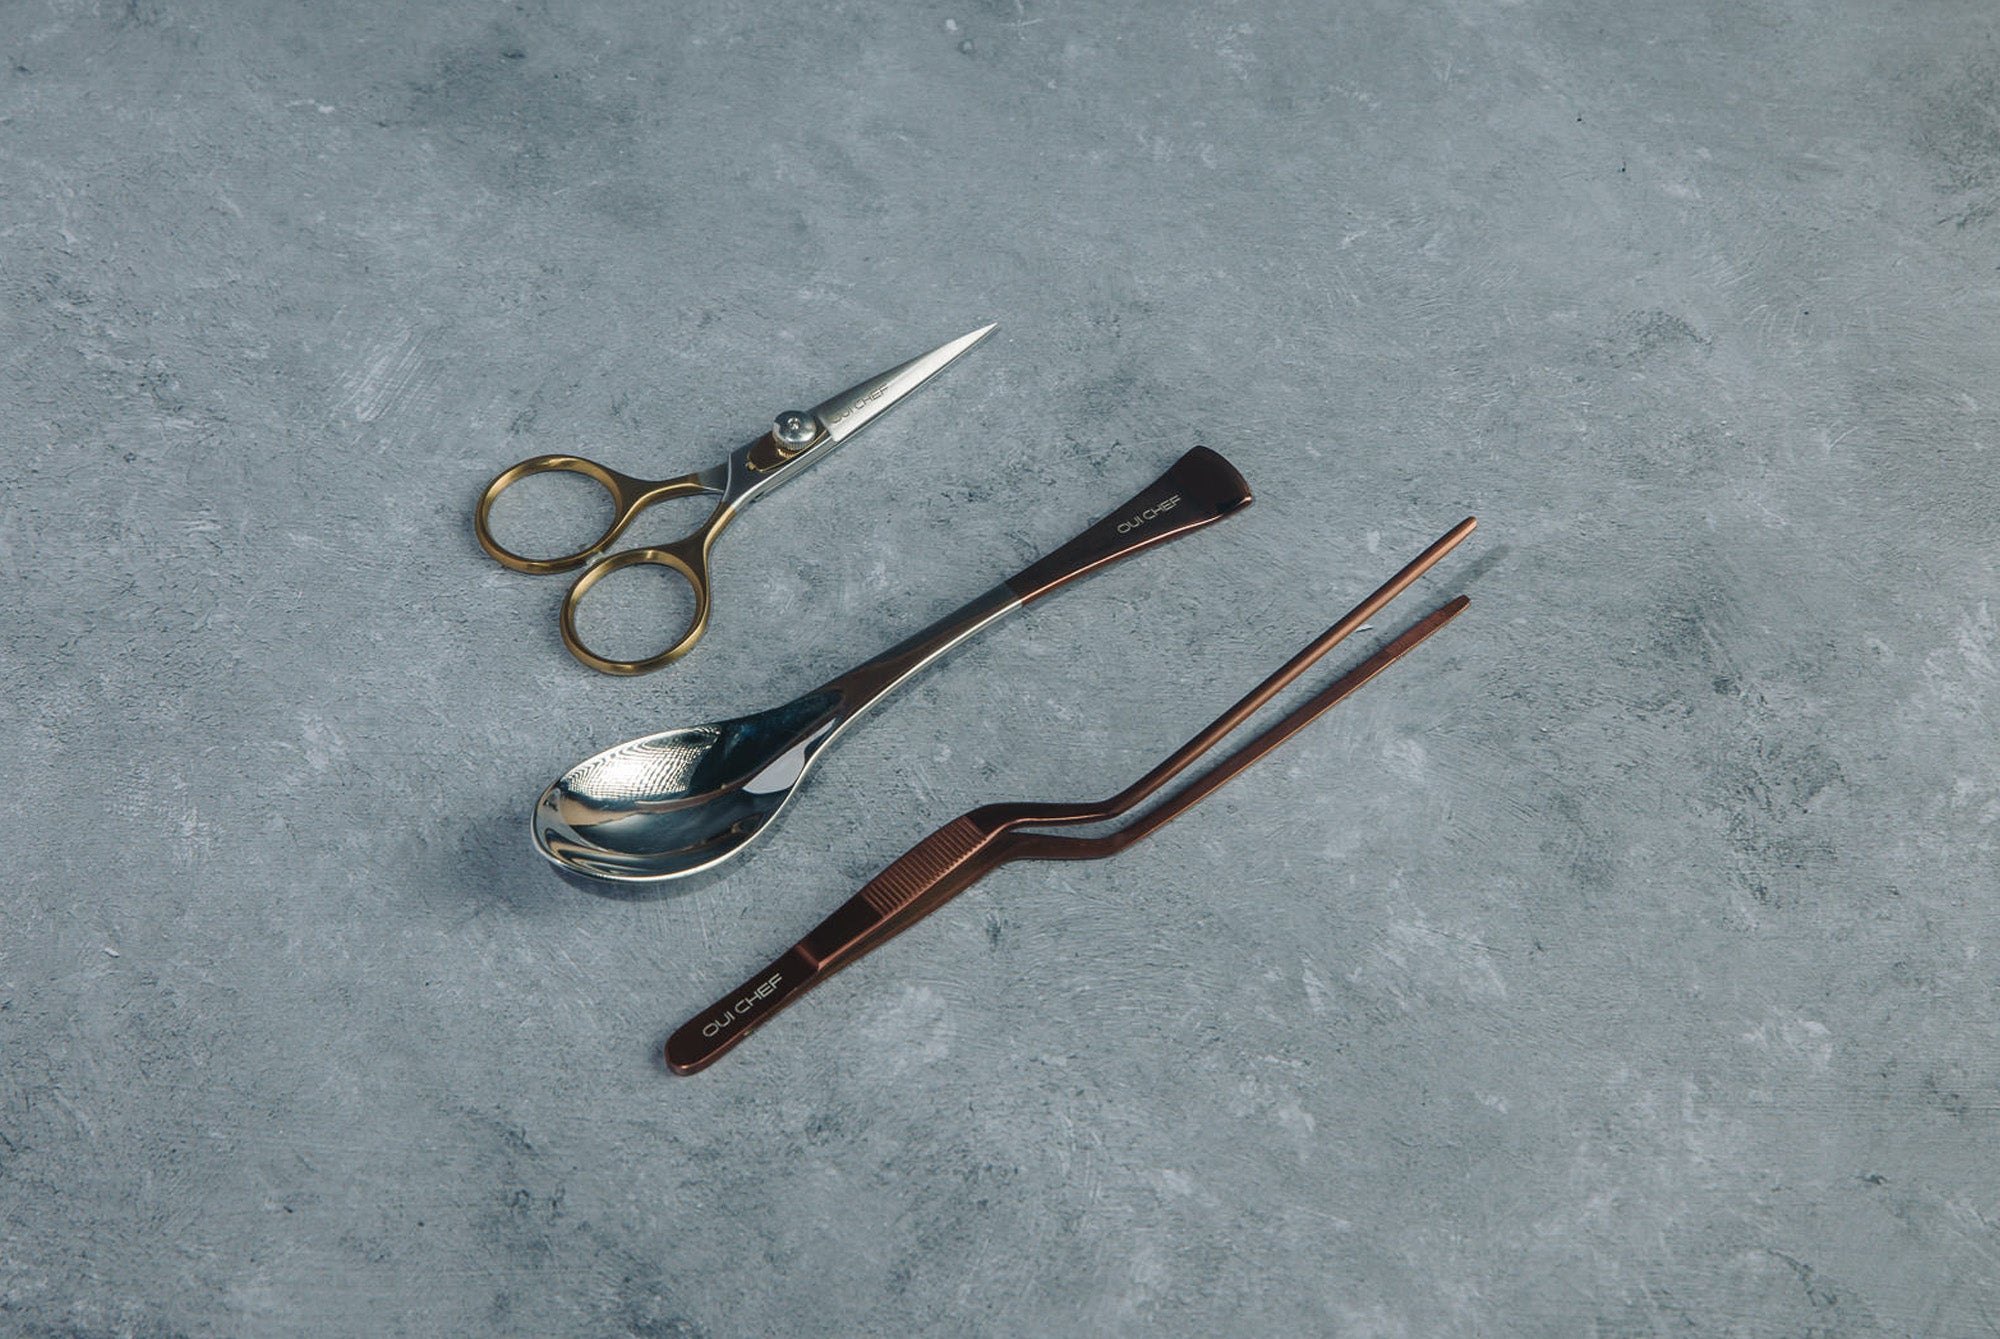 Oui Chef kitchen tools in copper top